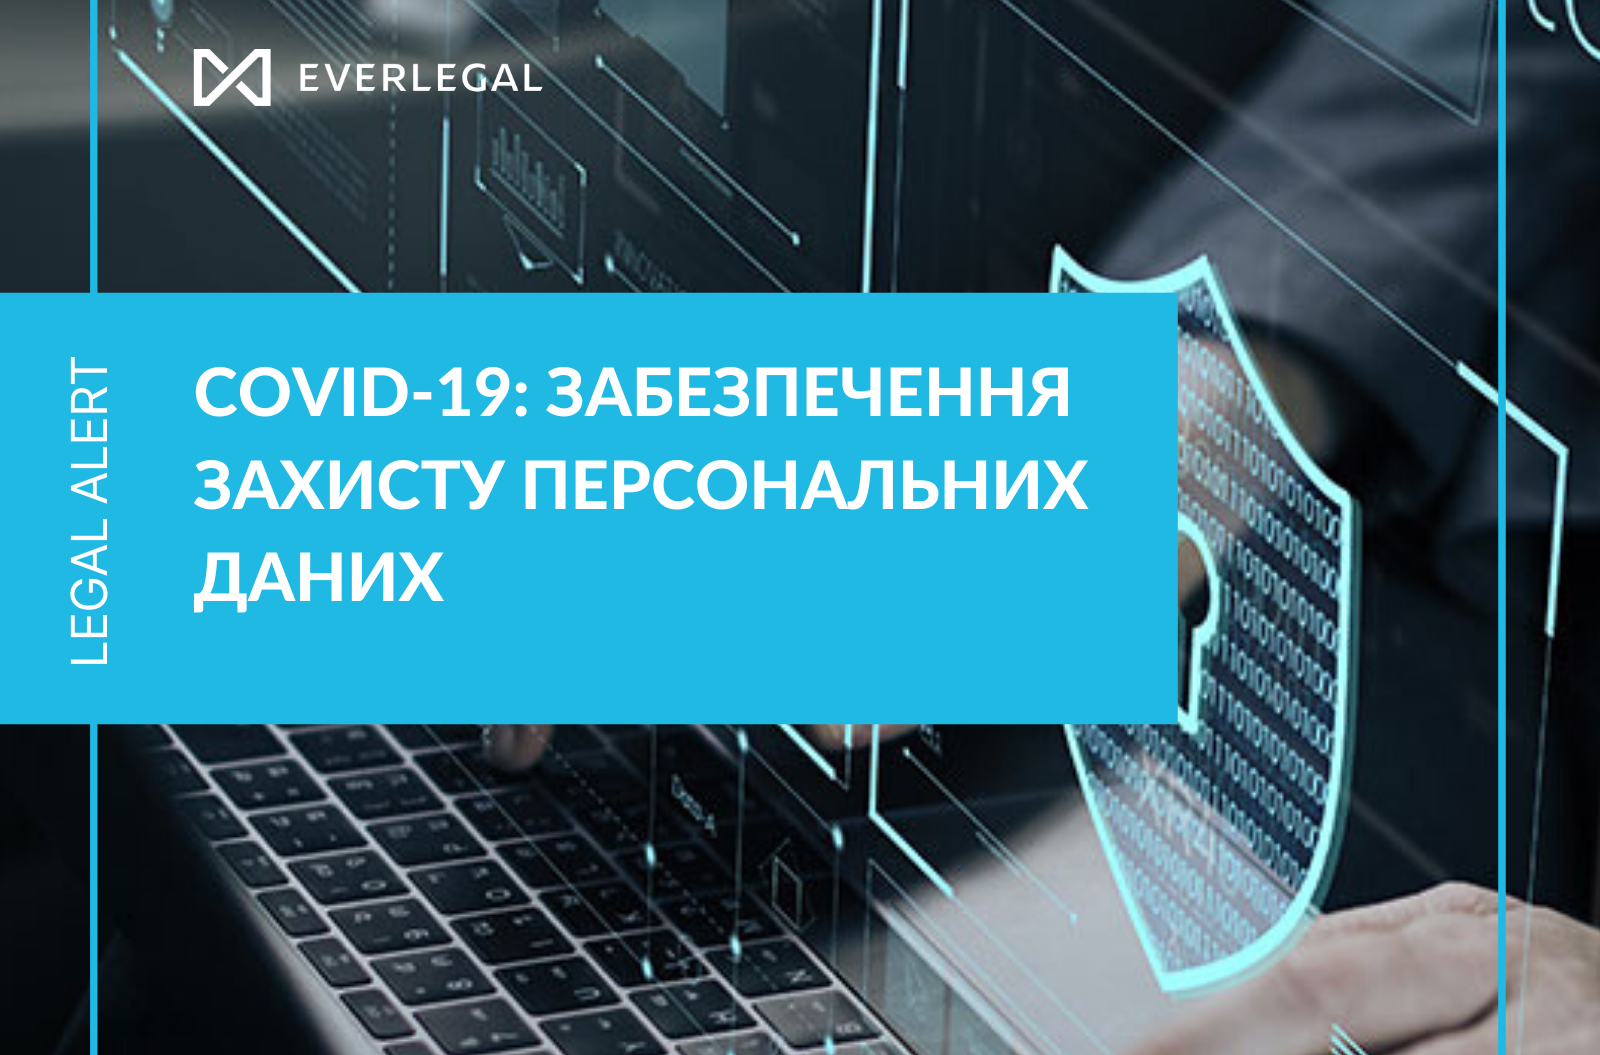 COVID-19: personal data protection